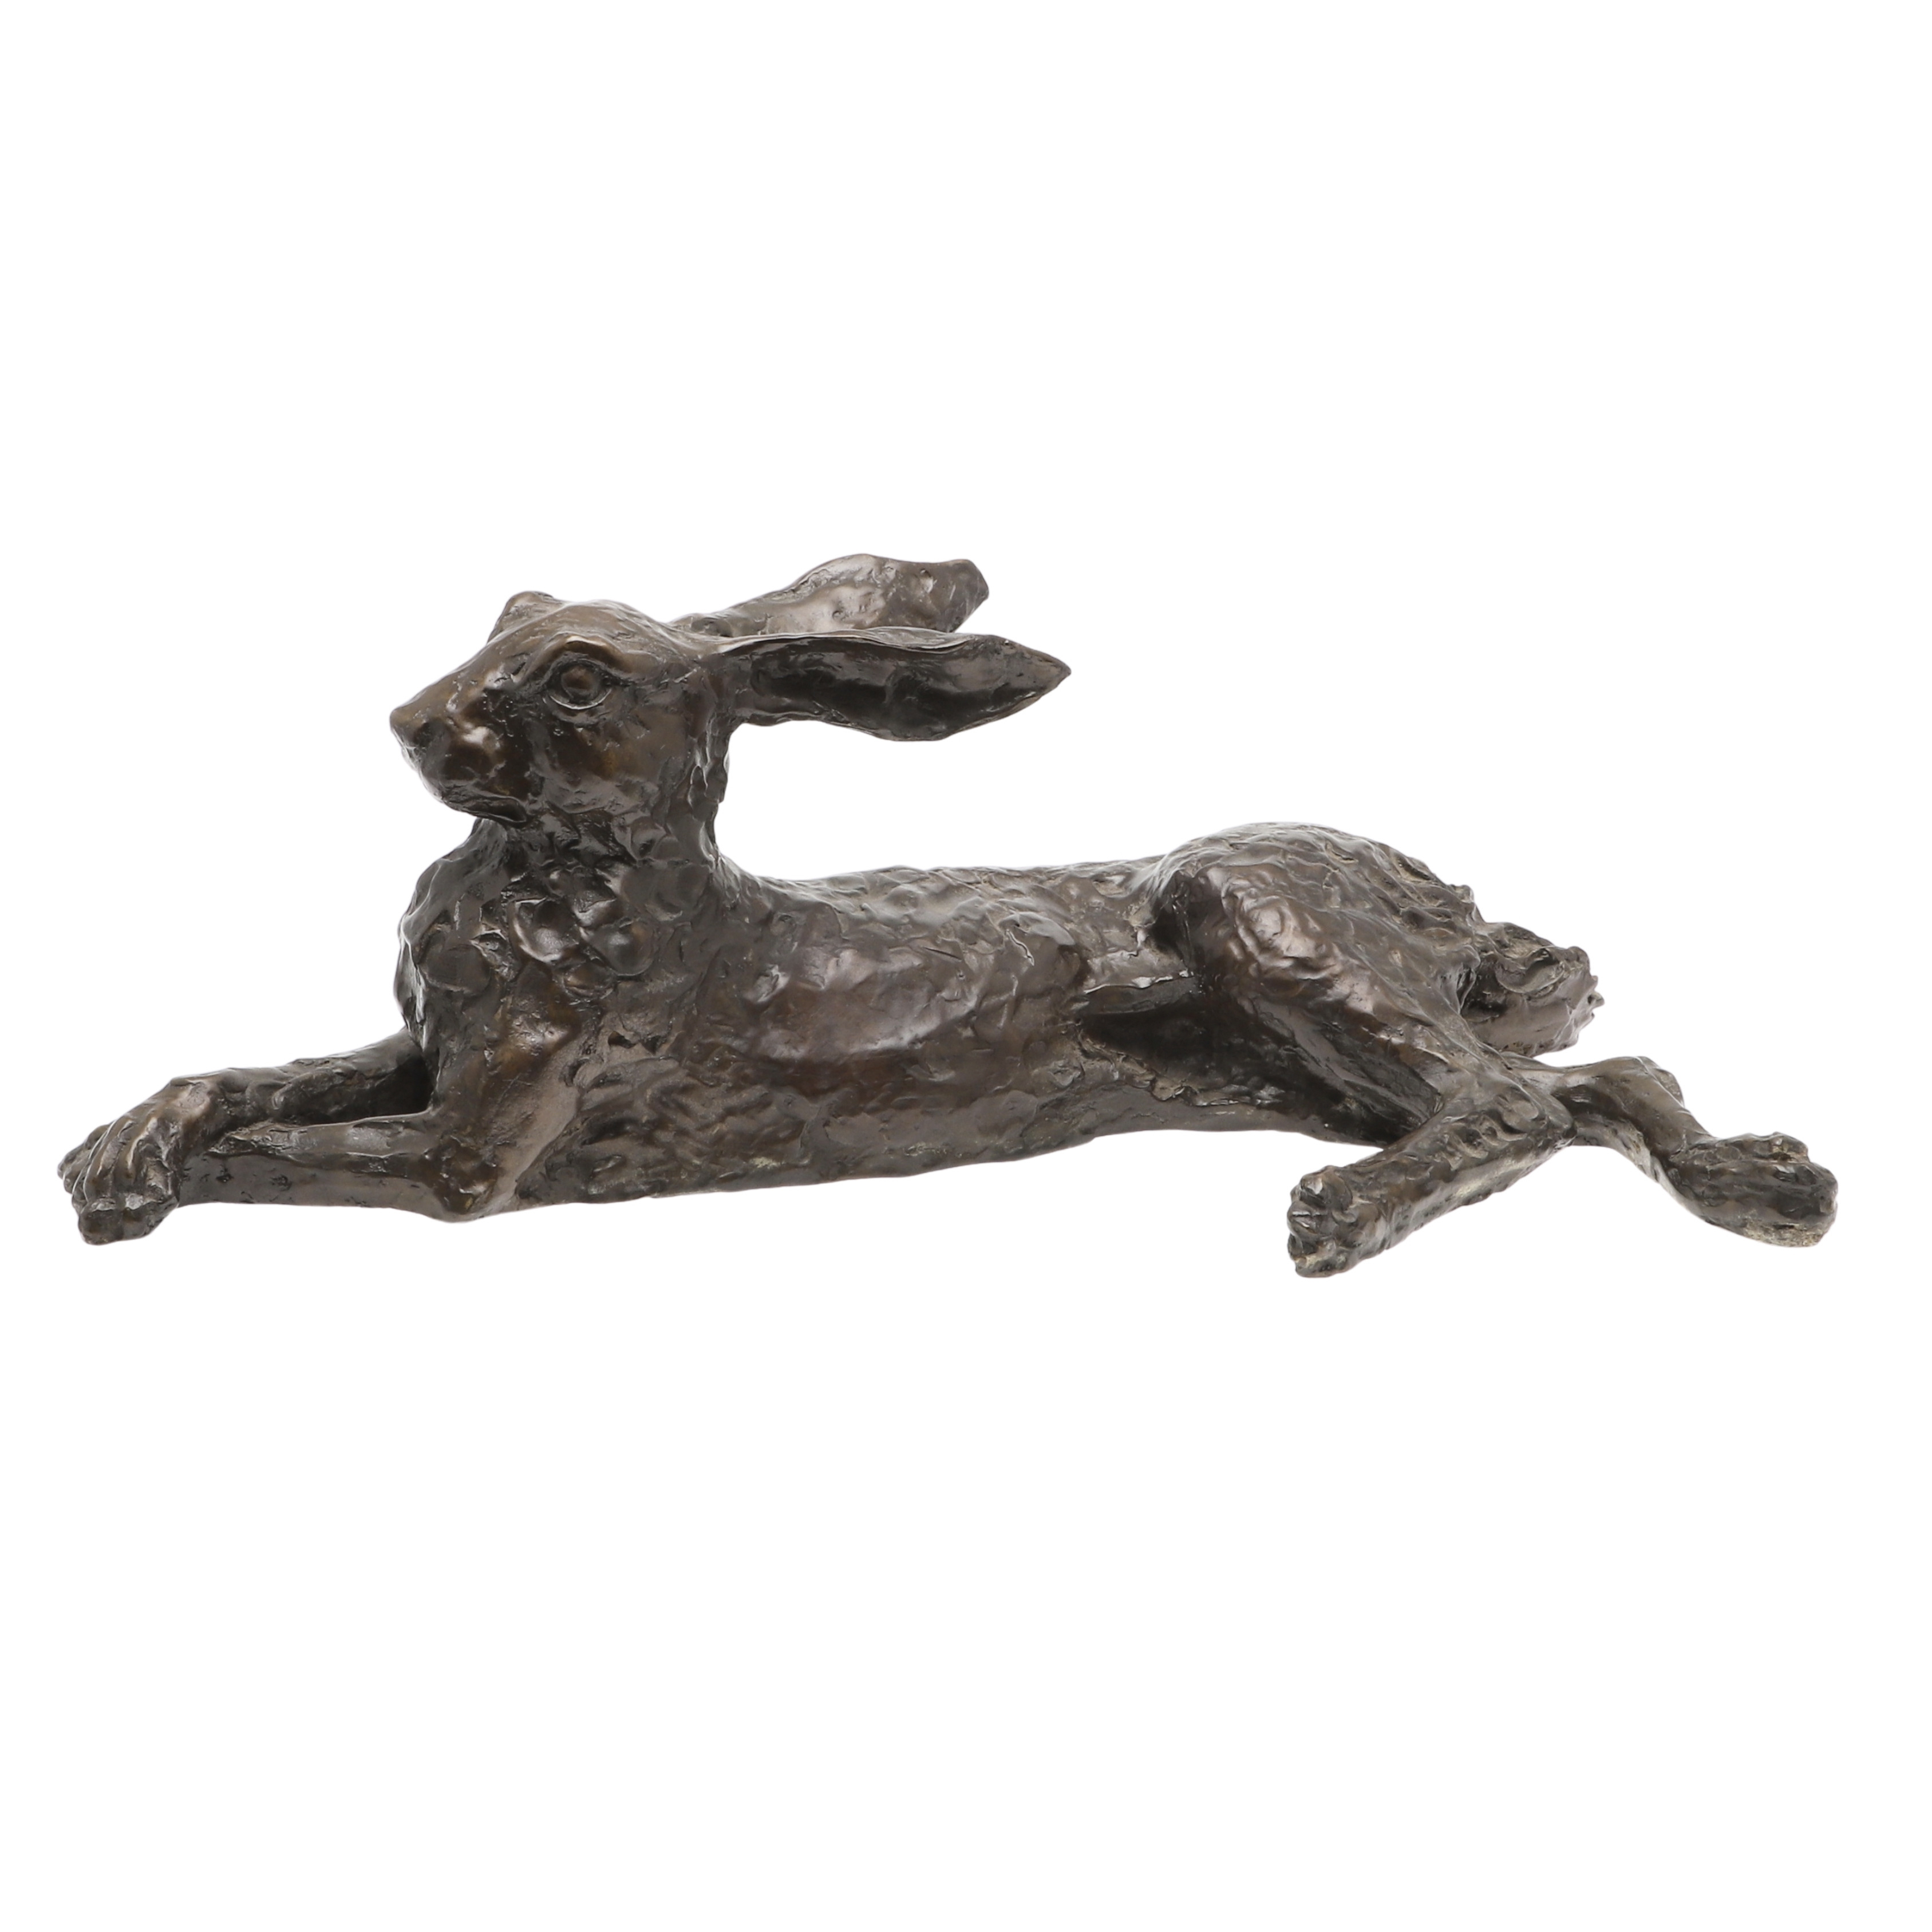 JOHN COX (1952-2014) LARGE BRONZE STUDY OF A RESTING HARE. (d) - Image 2 of 9